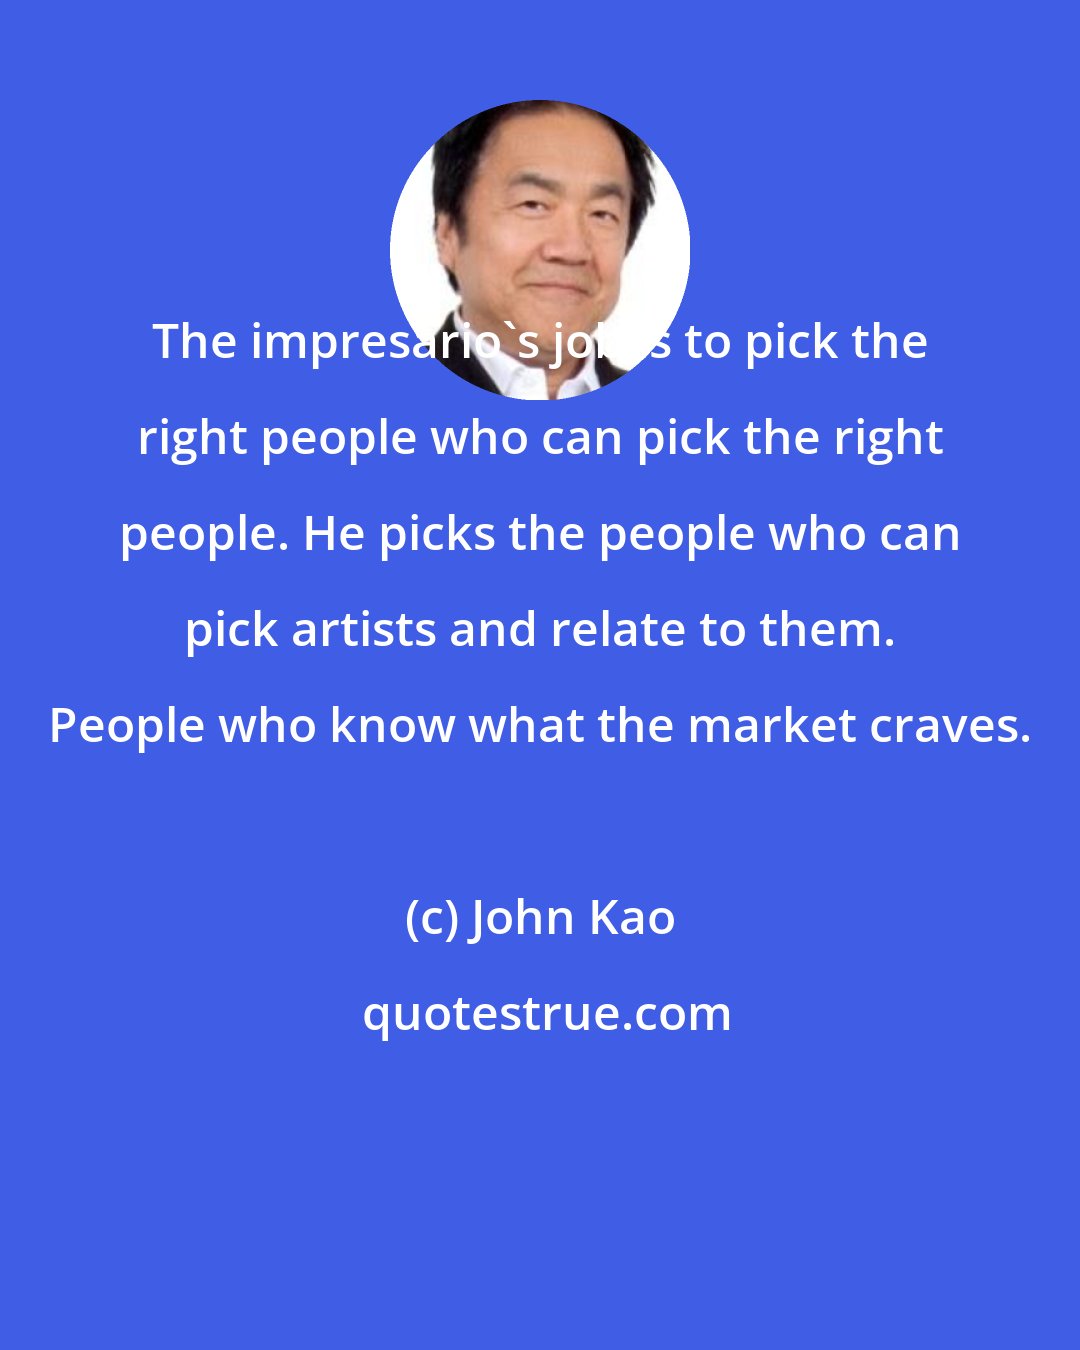 John Kao: The impresario's job is to pick the right people who can pick the right people. He picks the people who can pick artists and relate to them. People who know what the market craves.